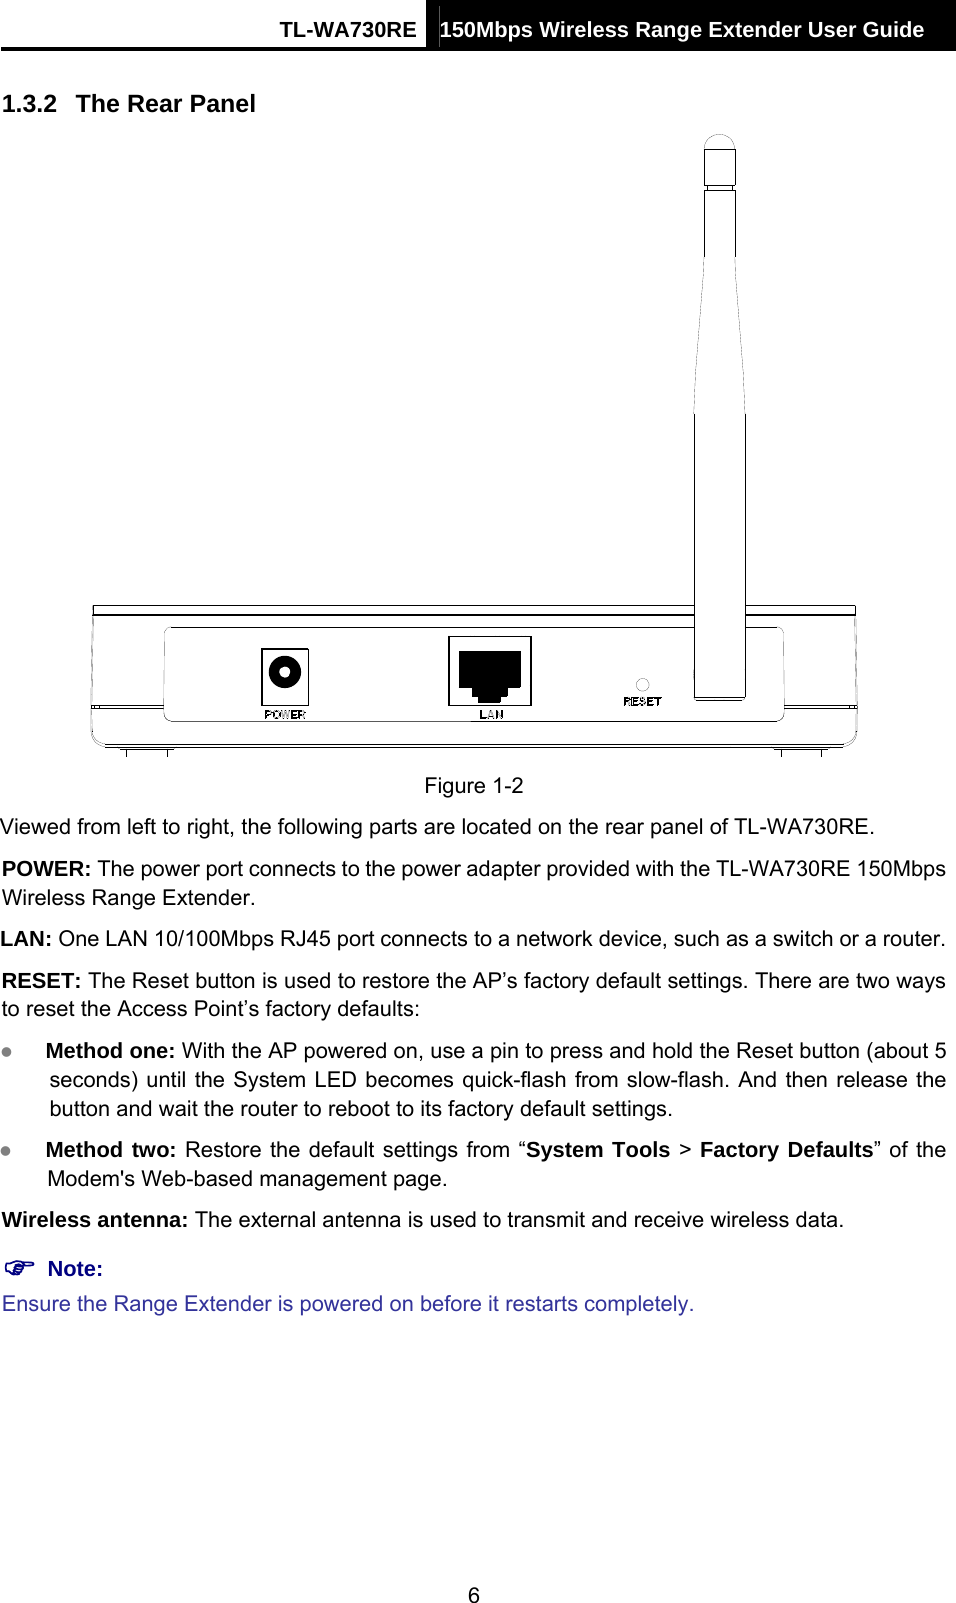 TL-WA730RE 150Mbps Wireless Range Extender User Guide  1.3.2  The Rear Panel  Figure 1-2 Viewed from left to right, the following parts are located on the rear panel of TL-WA730RE. POWER: The power port connects to the power adapter provided with the TL-WA730RE 150Mbps Wireless Range Extender. LAN: One LAN 10/100Mbps RJ45 port connects to a network device, such as a switch or a router. RESET: The Reset button is used to restore the AP’s factory default settings. There are two ways to reset the Access Point’s factory defaults:   z Method one: With the AP powered on, use a pin to press and hold the Reset button (about 5 seconds) until the System LED becomes quick-flash from slow-flash. And then release the button and wait the router to reboot to its factory default settings.   z Method two: Restore the default settings from “System Tools &gt; Factory Defaults” of the Modem&apos;s Web-based management page. Wireless antenna: The external antenna is used to transmit and receive wireless data. ) Note: Ensure the Range Extender is powered on before it restarts completely. 6 